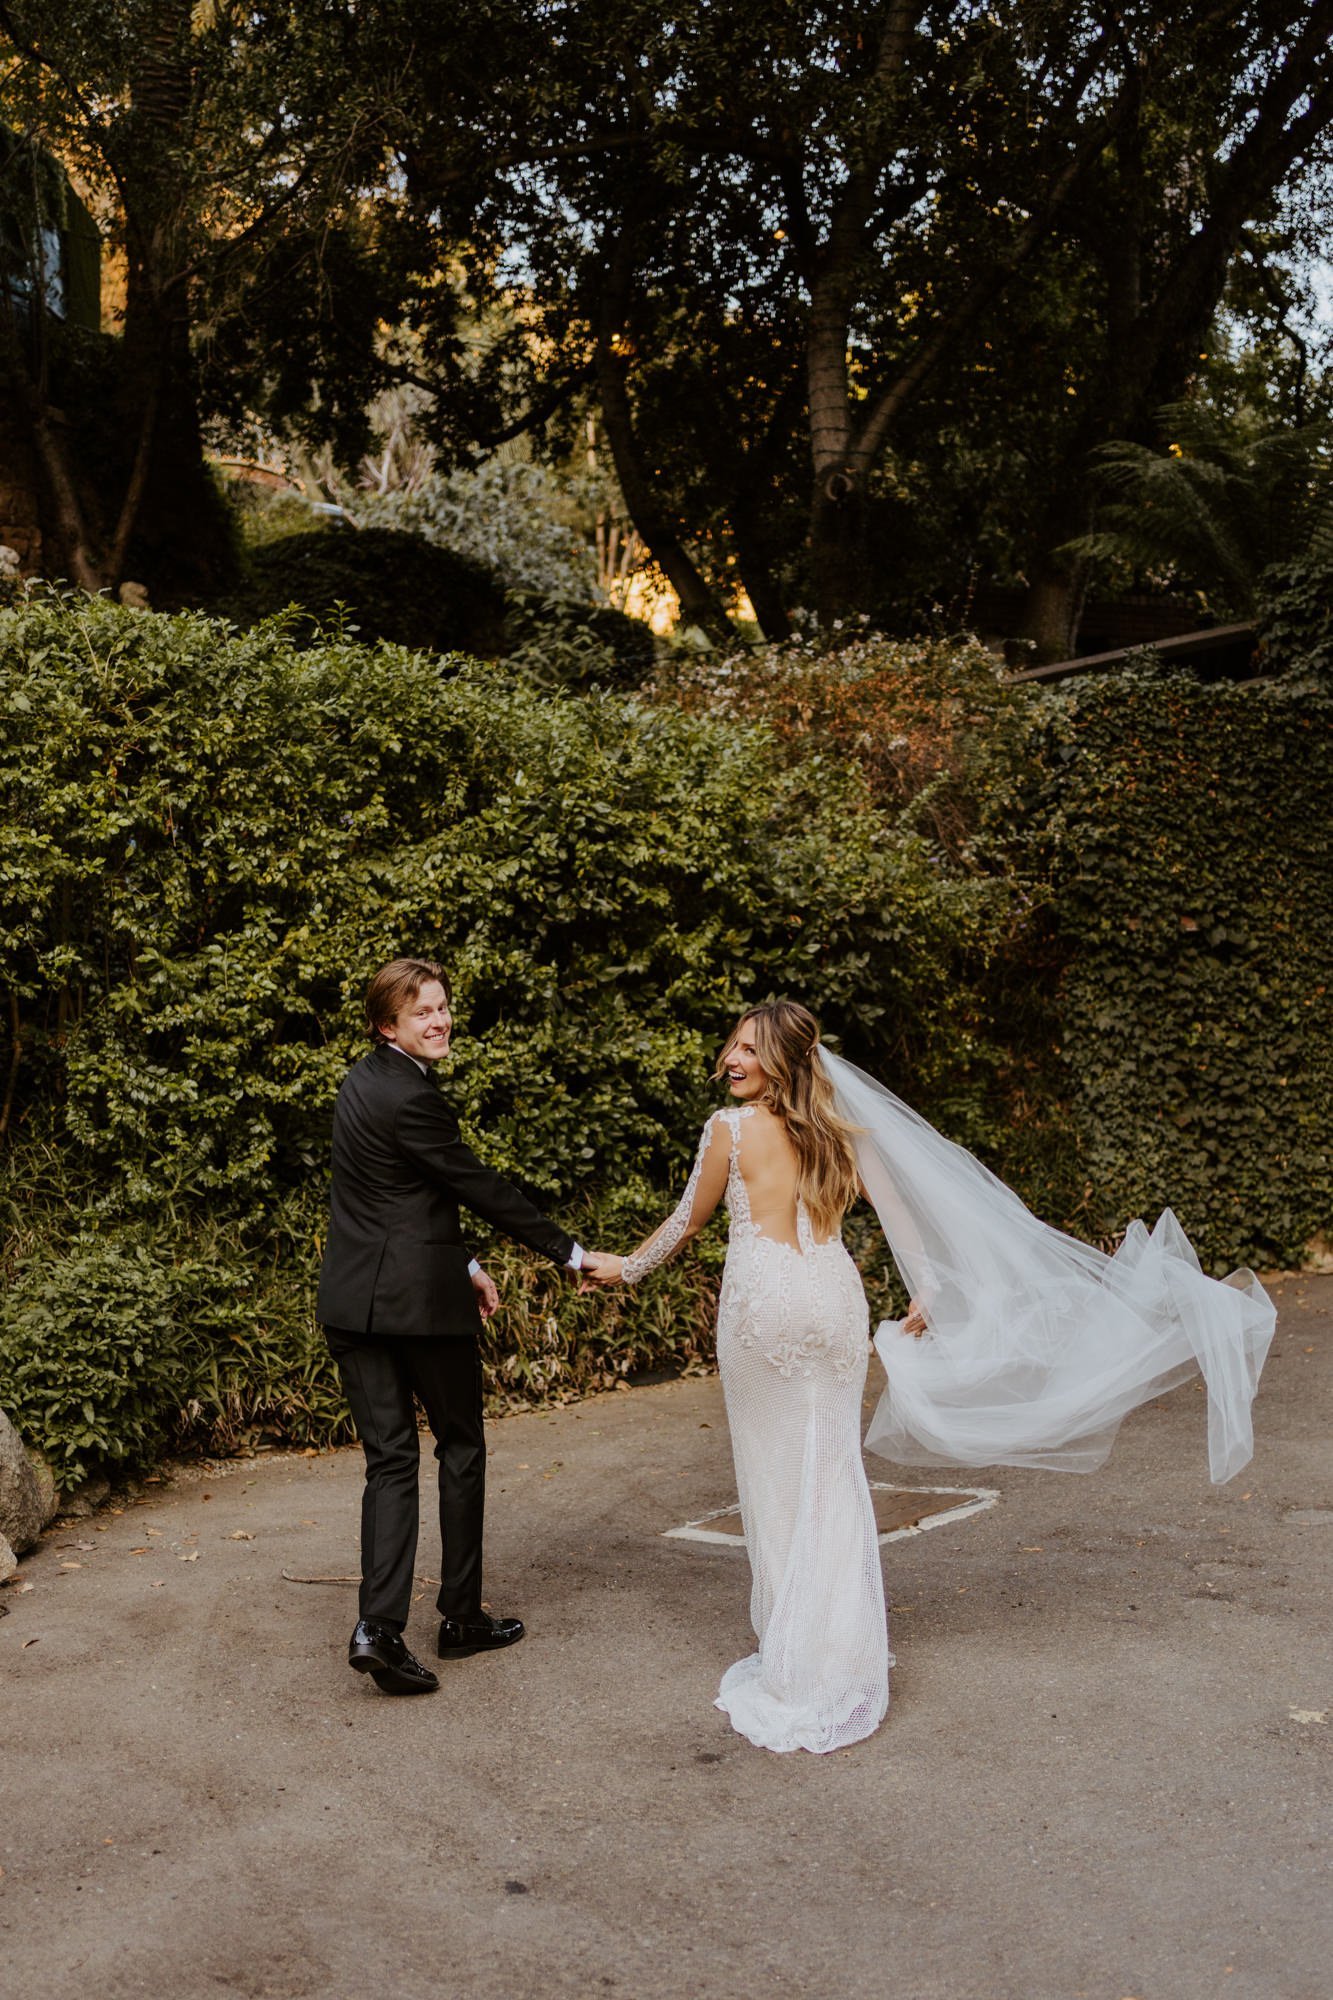 Romantic wedding portrait at The Houdini Estate in Los Angeles, wedding photography by Tida Svy